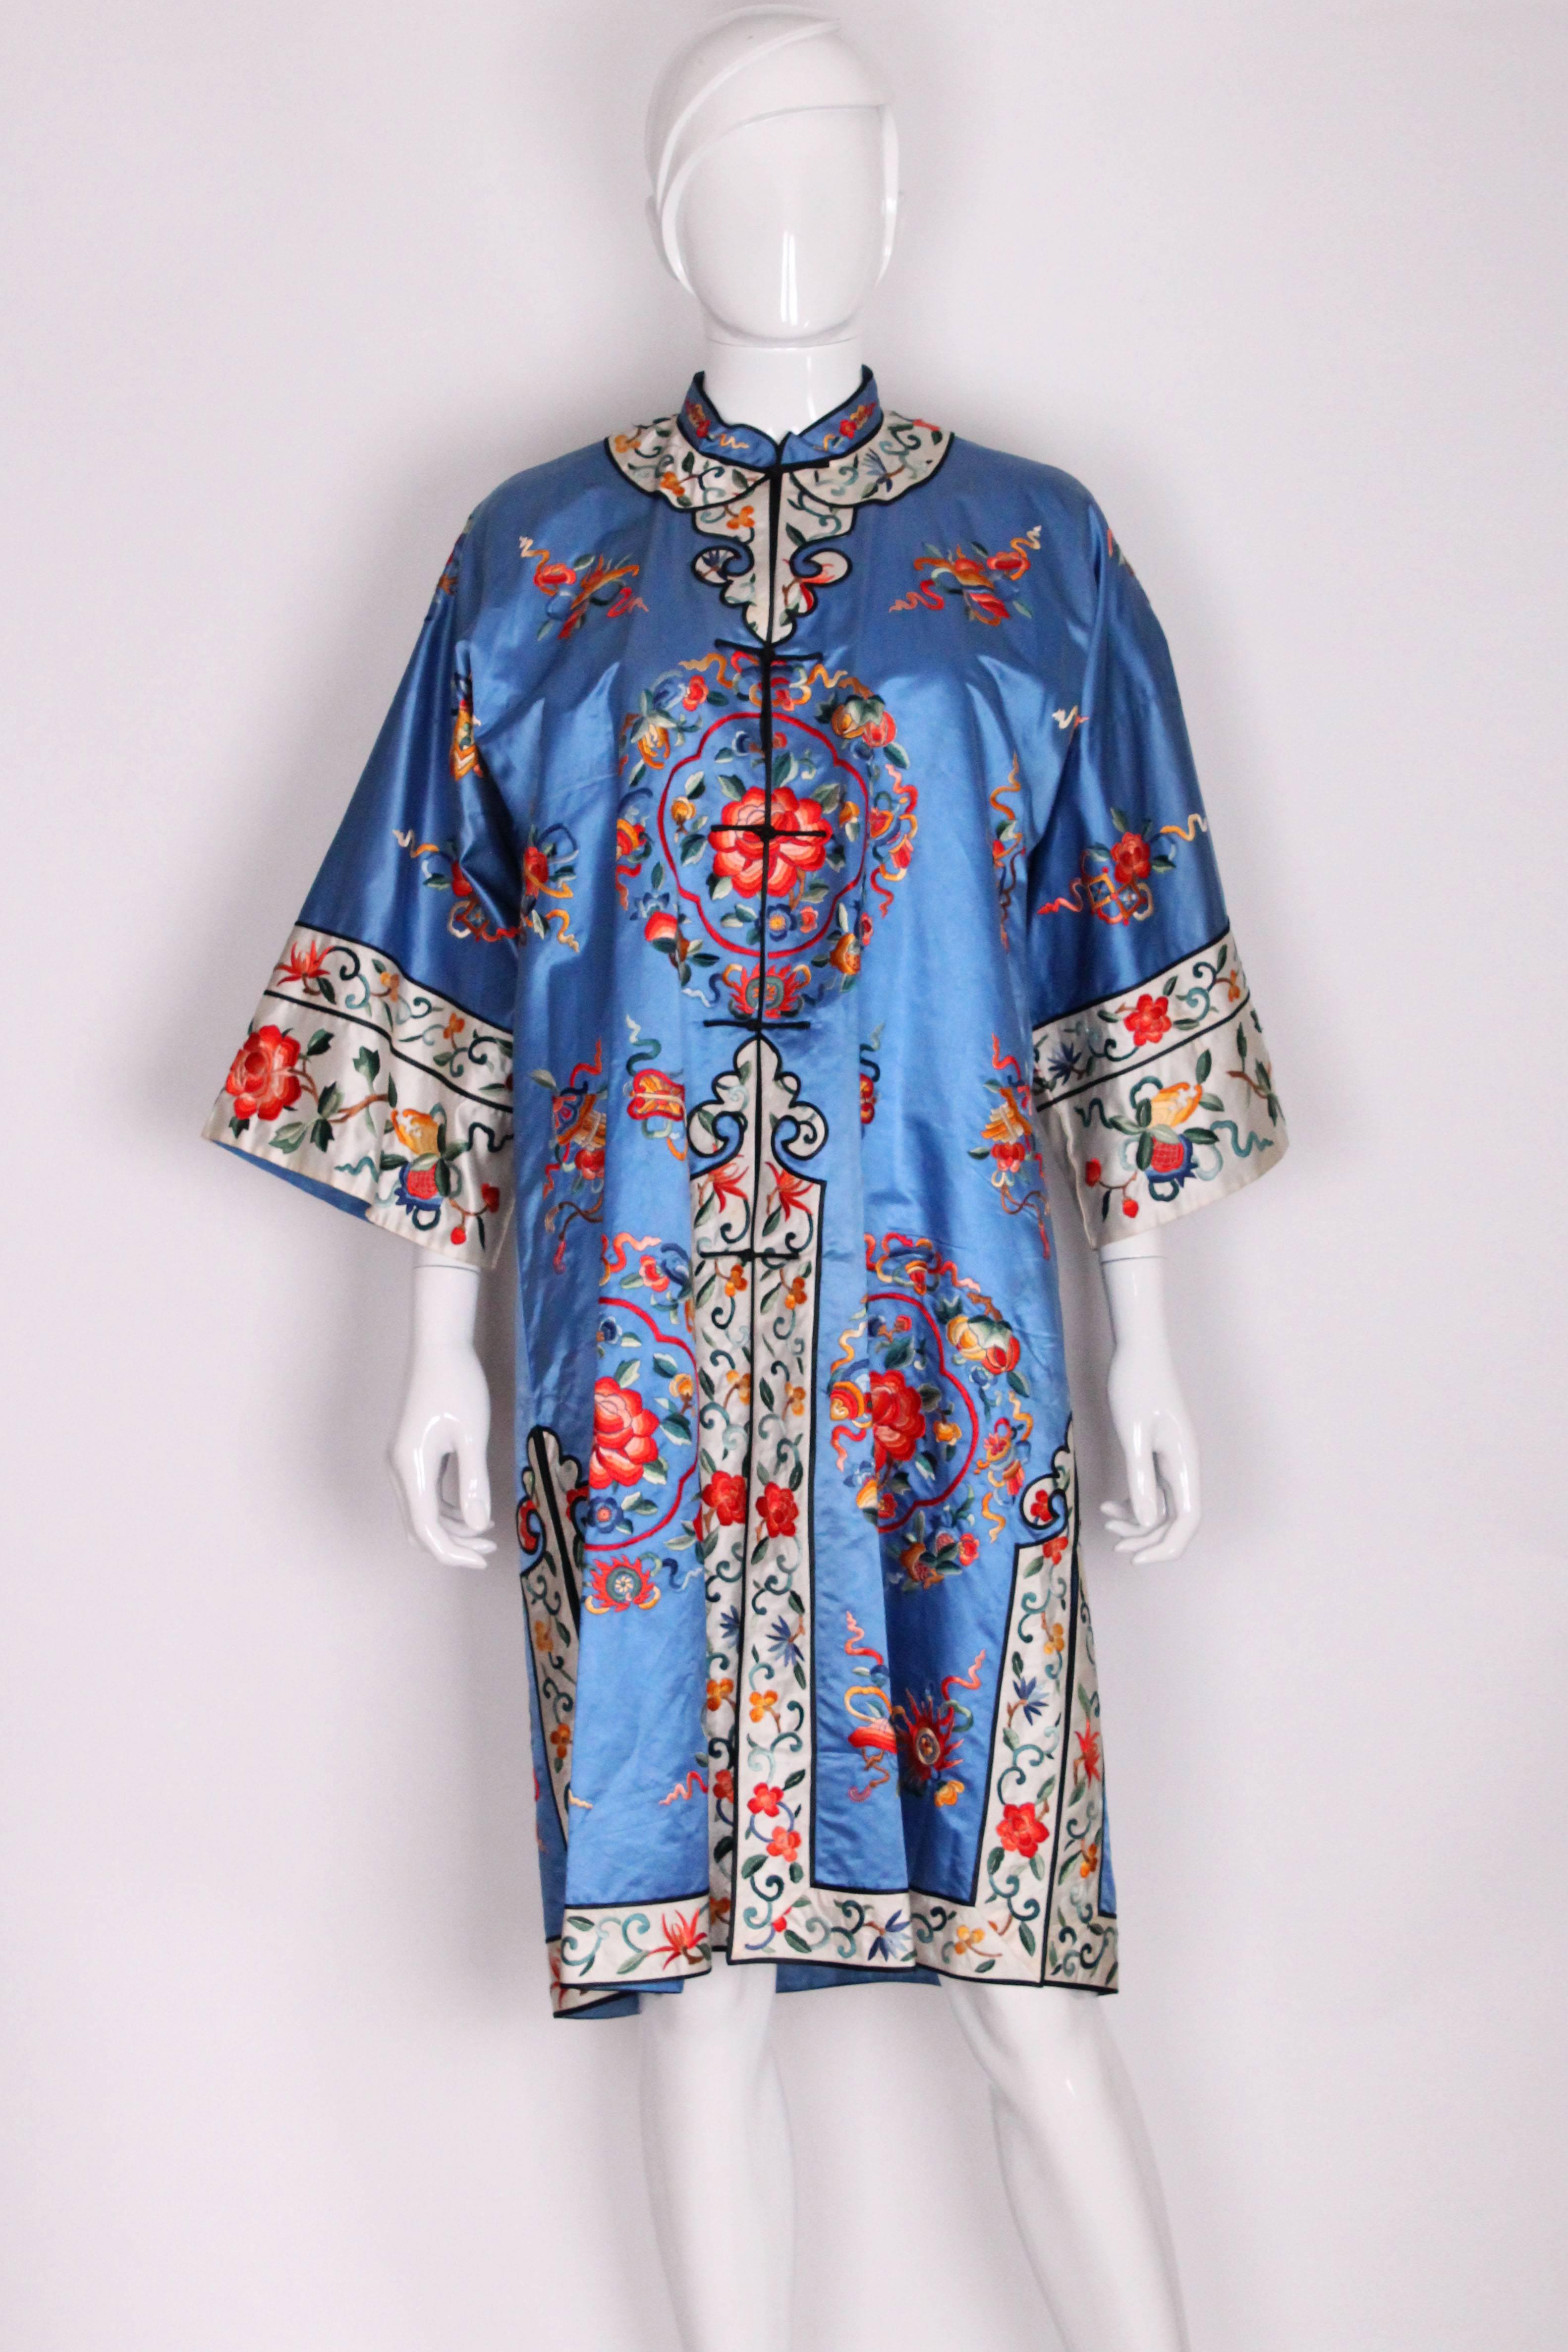 A great silk jacket from China, in a wonderful blue and covered in brightly coloured embroidery. The body of the coat is a wonderful China blue with floral embroidery and it has a white border on the cuff, hem and yolk, with embroidery along it. The